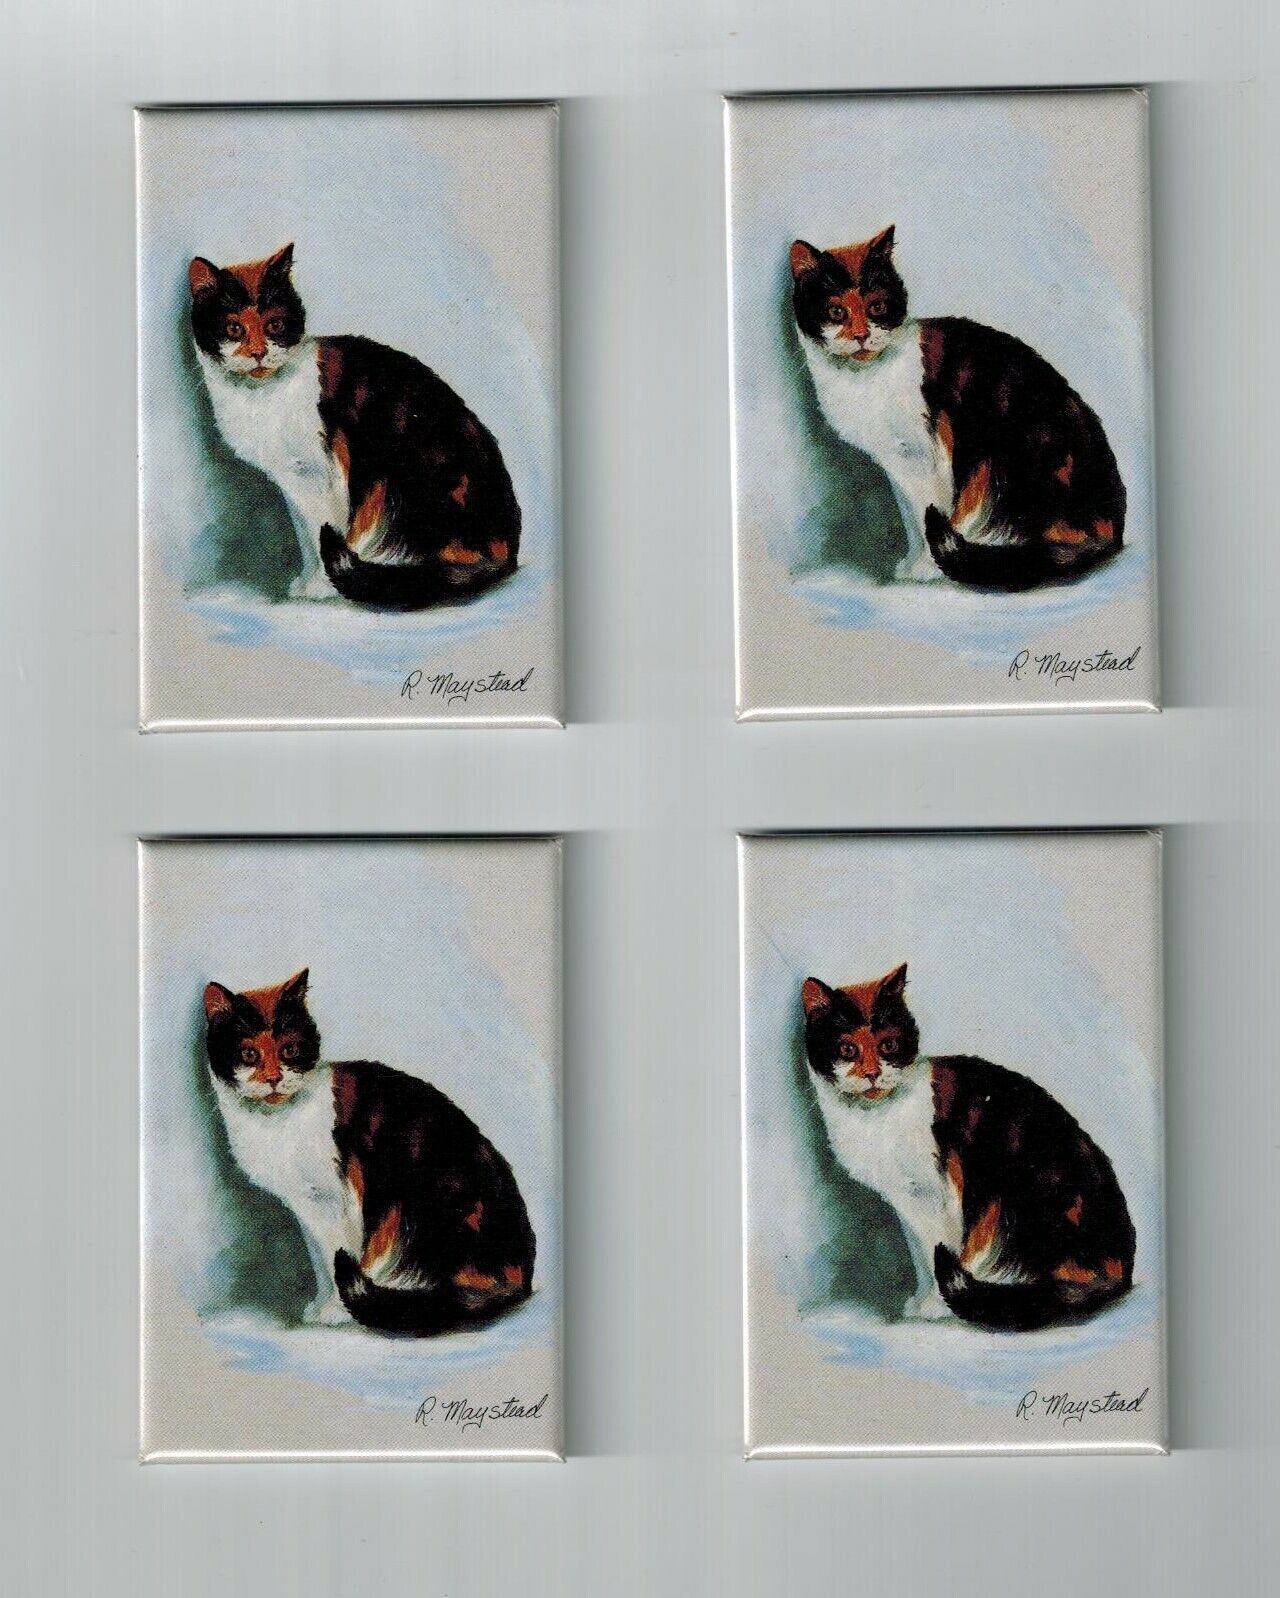 New Calico Cat Magnet Set - 4 Magnets By Ruth Maystead #cats-15